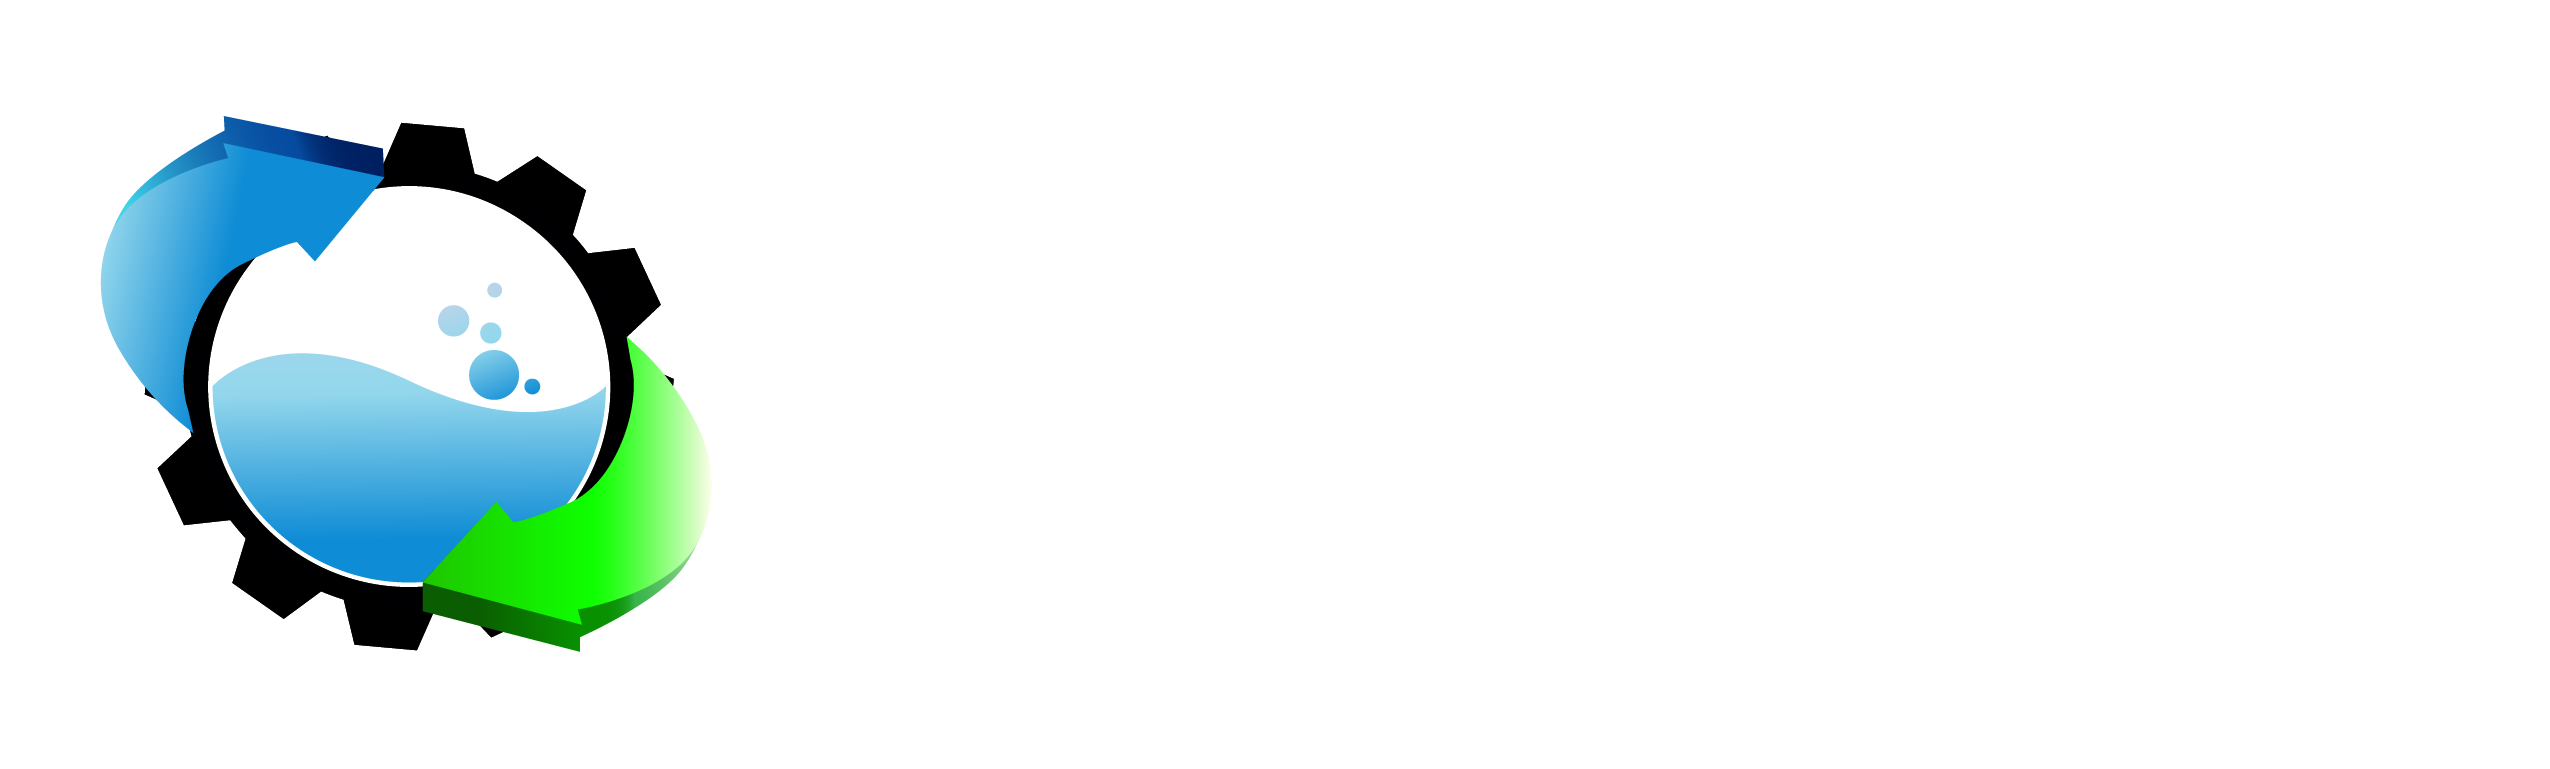 New Age Technologies